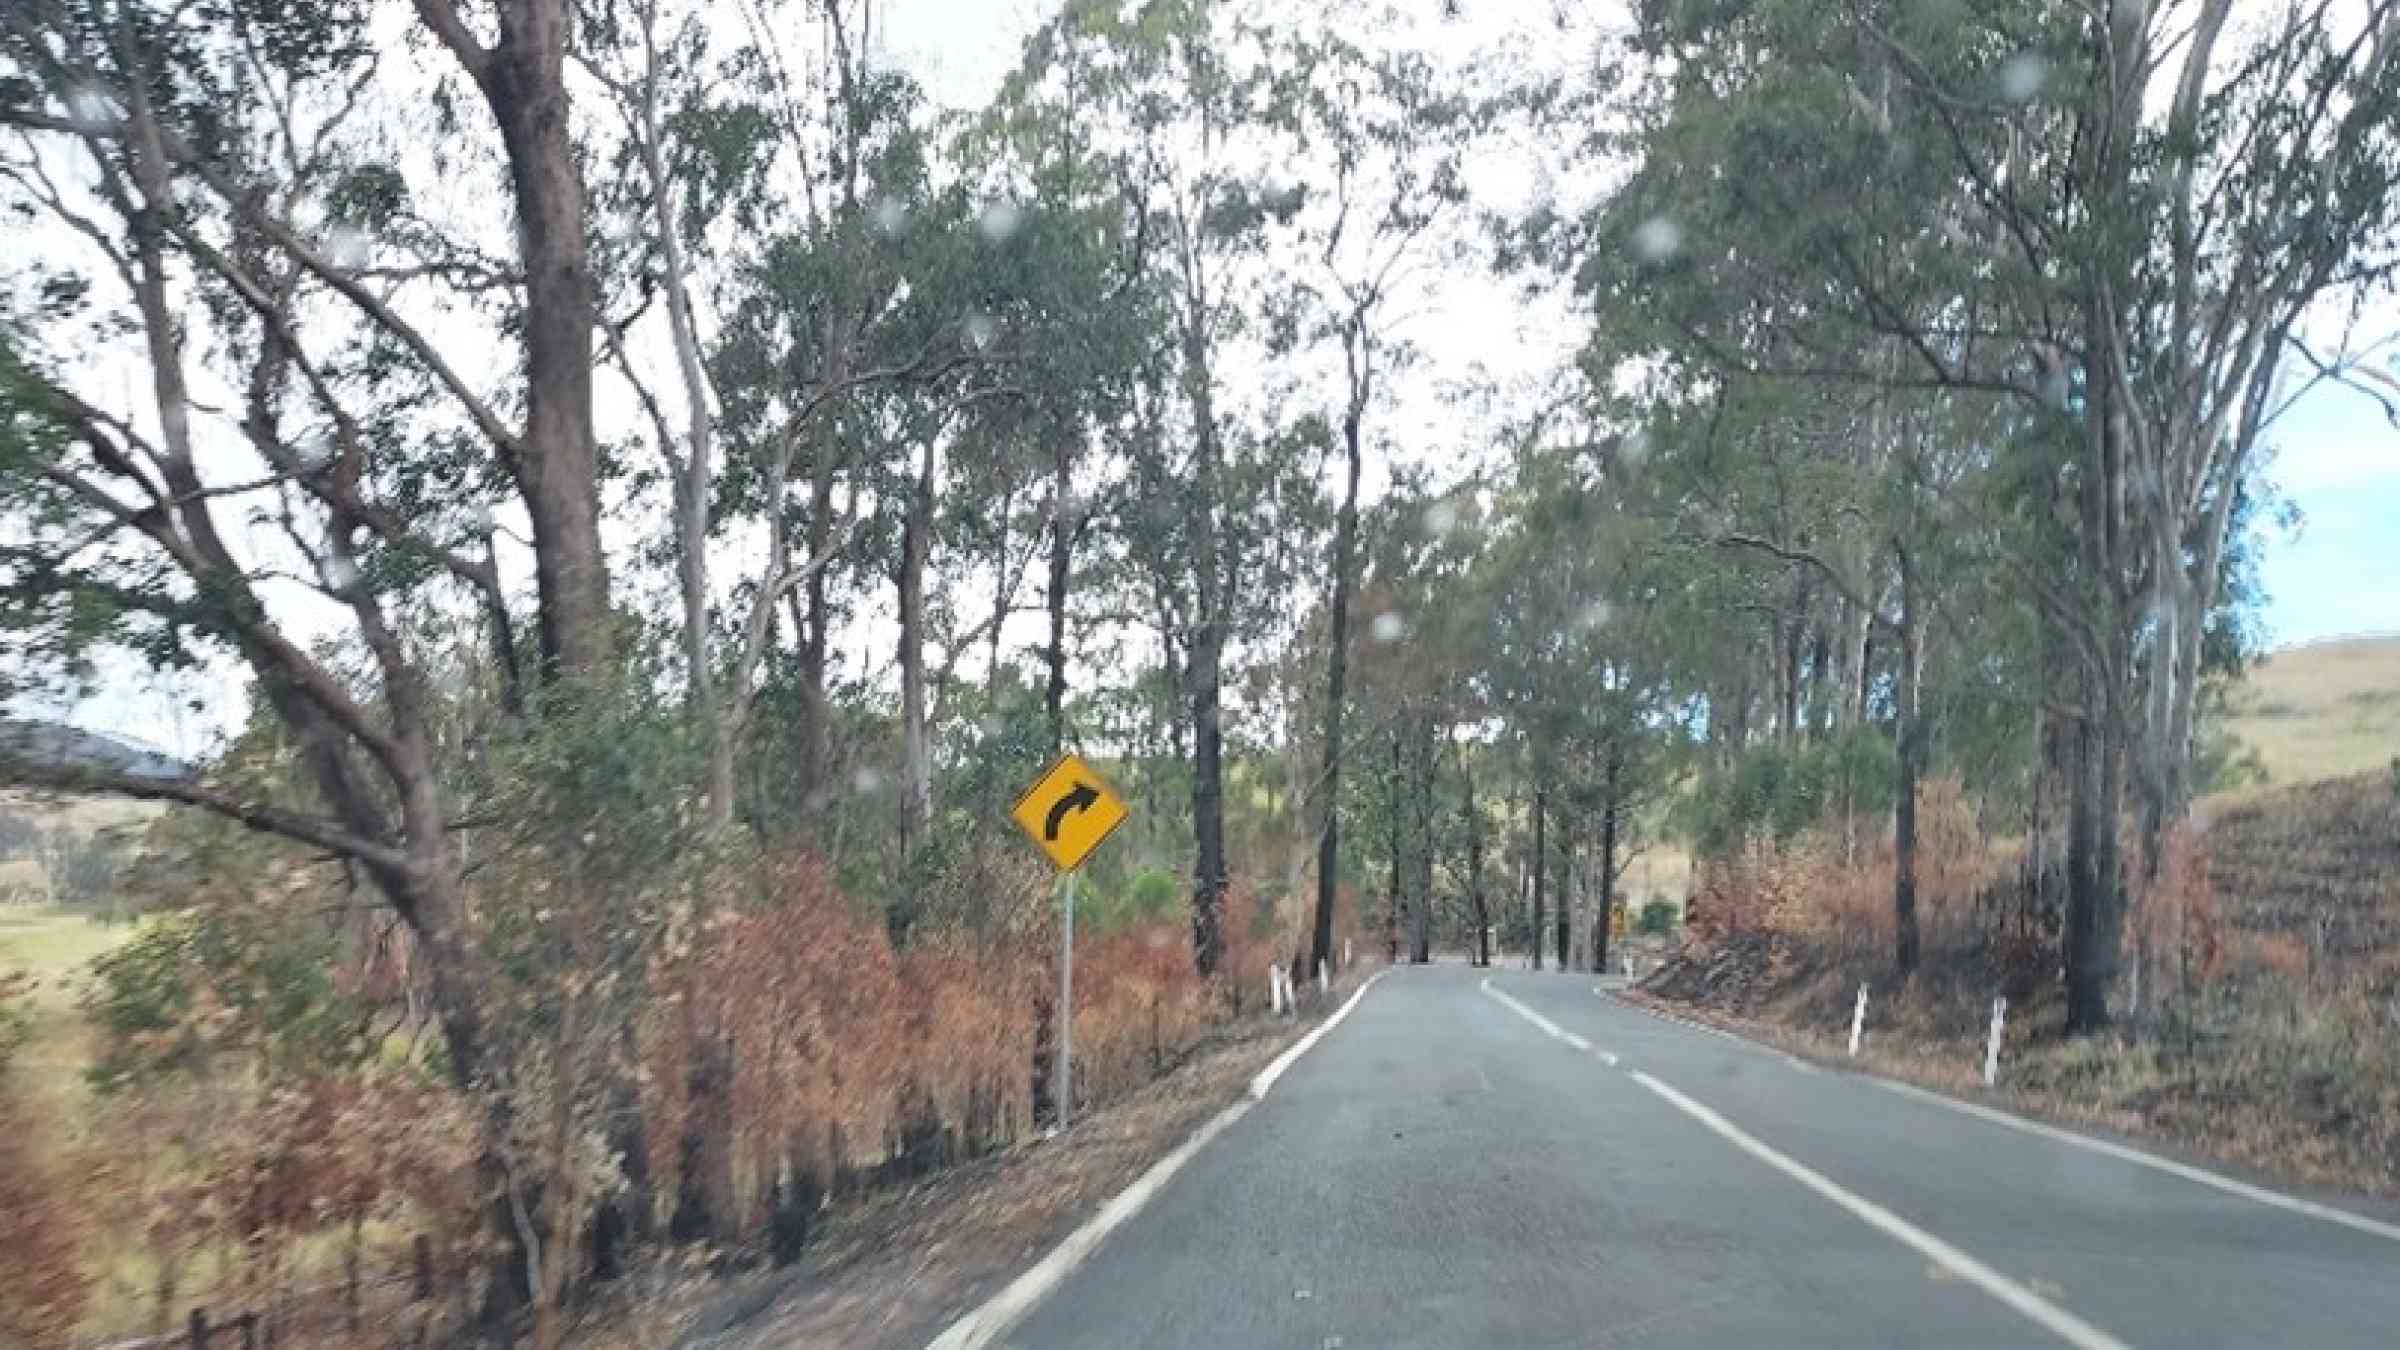 Recent prescribed burning beside a main road in southern Queensland, assisting in firefighter safety, firefighting/ backburning and reducing bushfire escape/ travel risks.